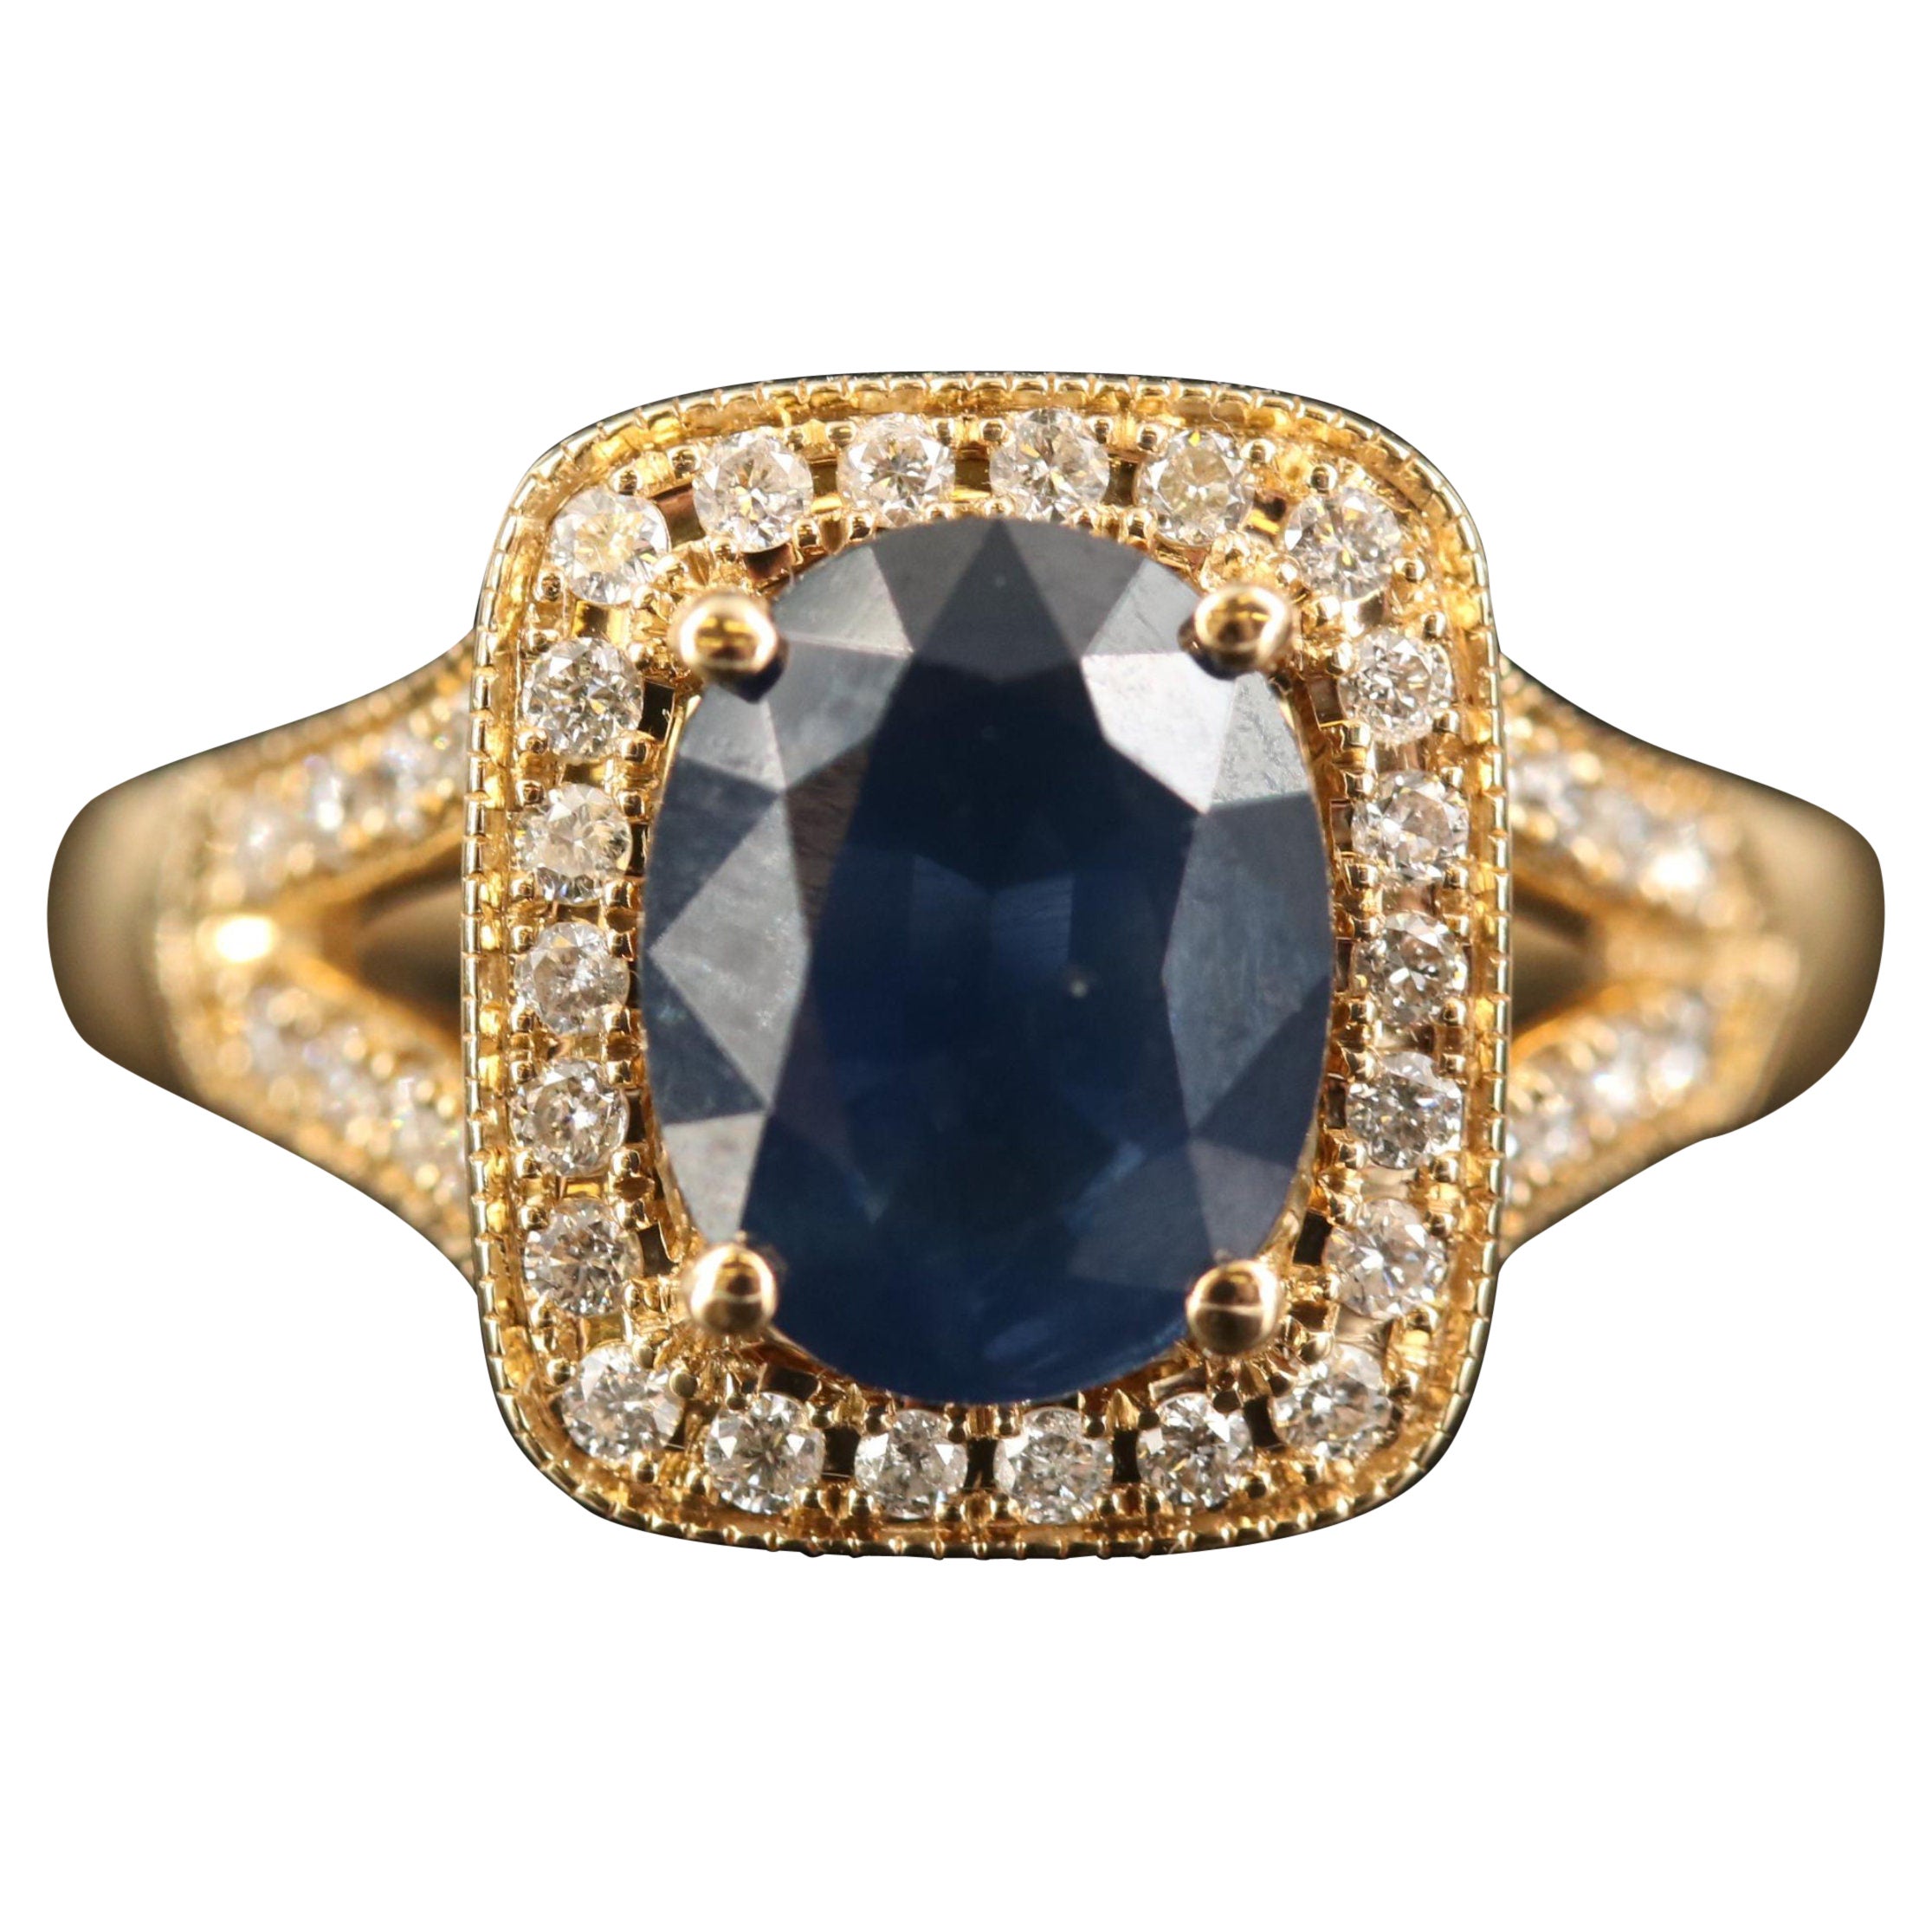 For Sale:  Antique Oval Cut Sapphire Engagement Ring Halo Vintage Diamond Wedding Ring